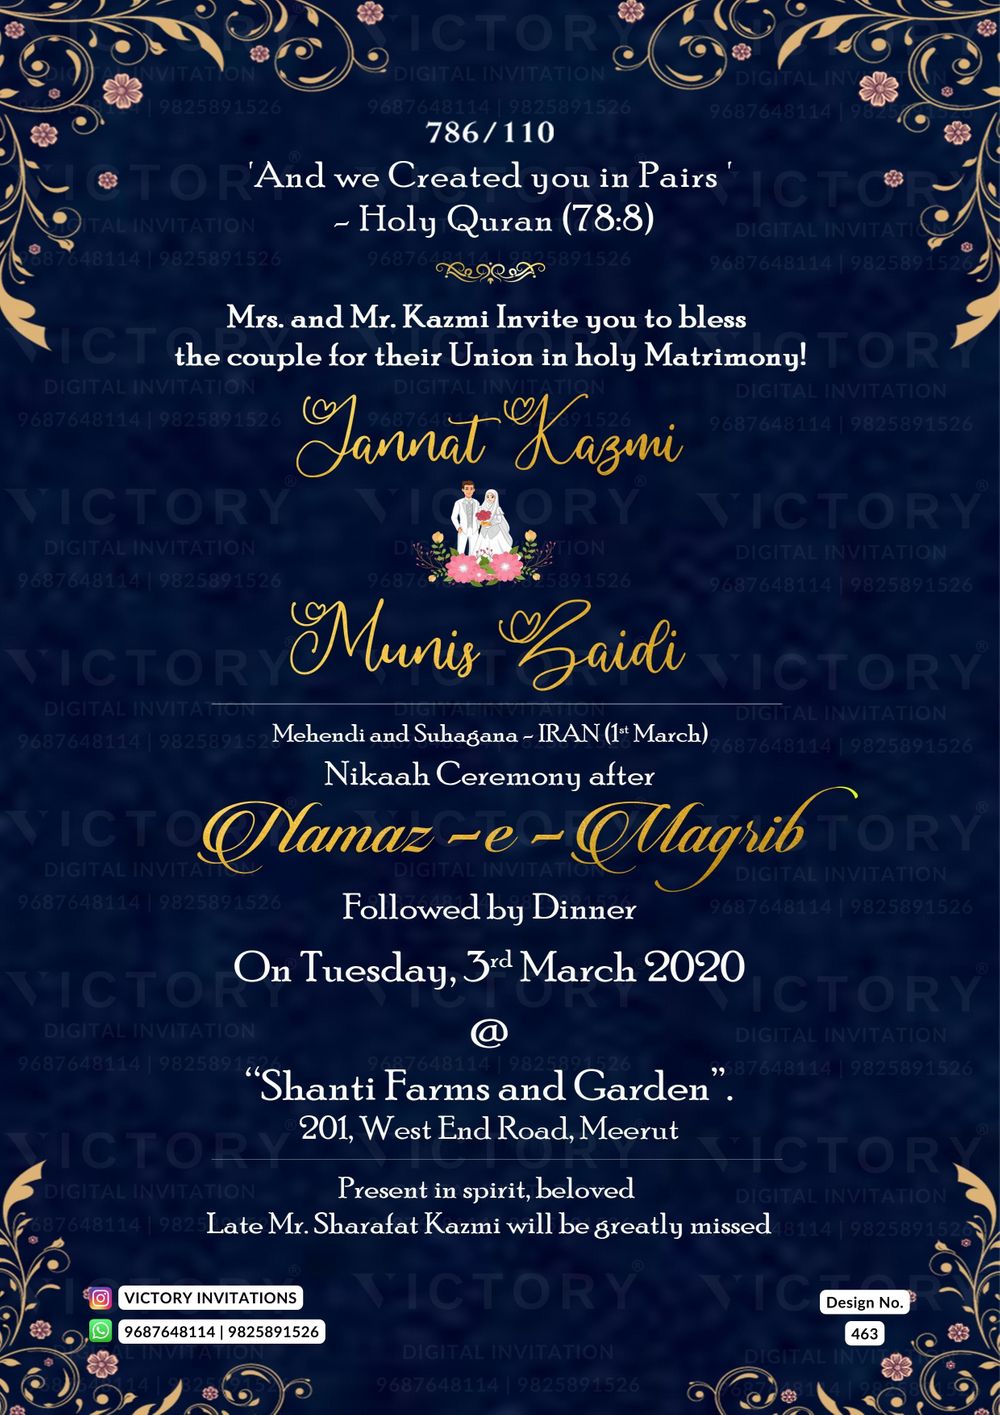 Photo From Nikah Ceremony - By Victory Invitations